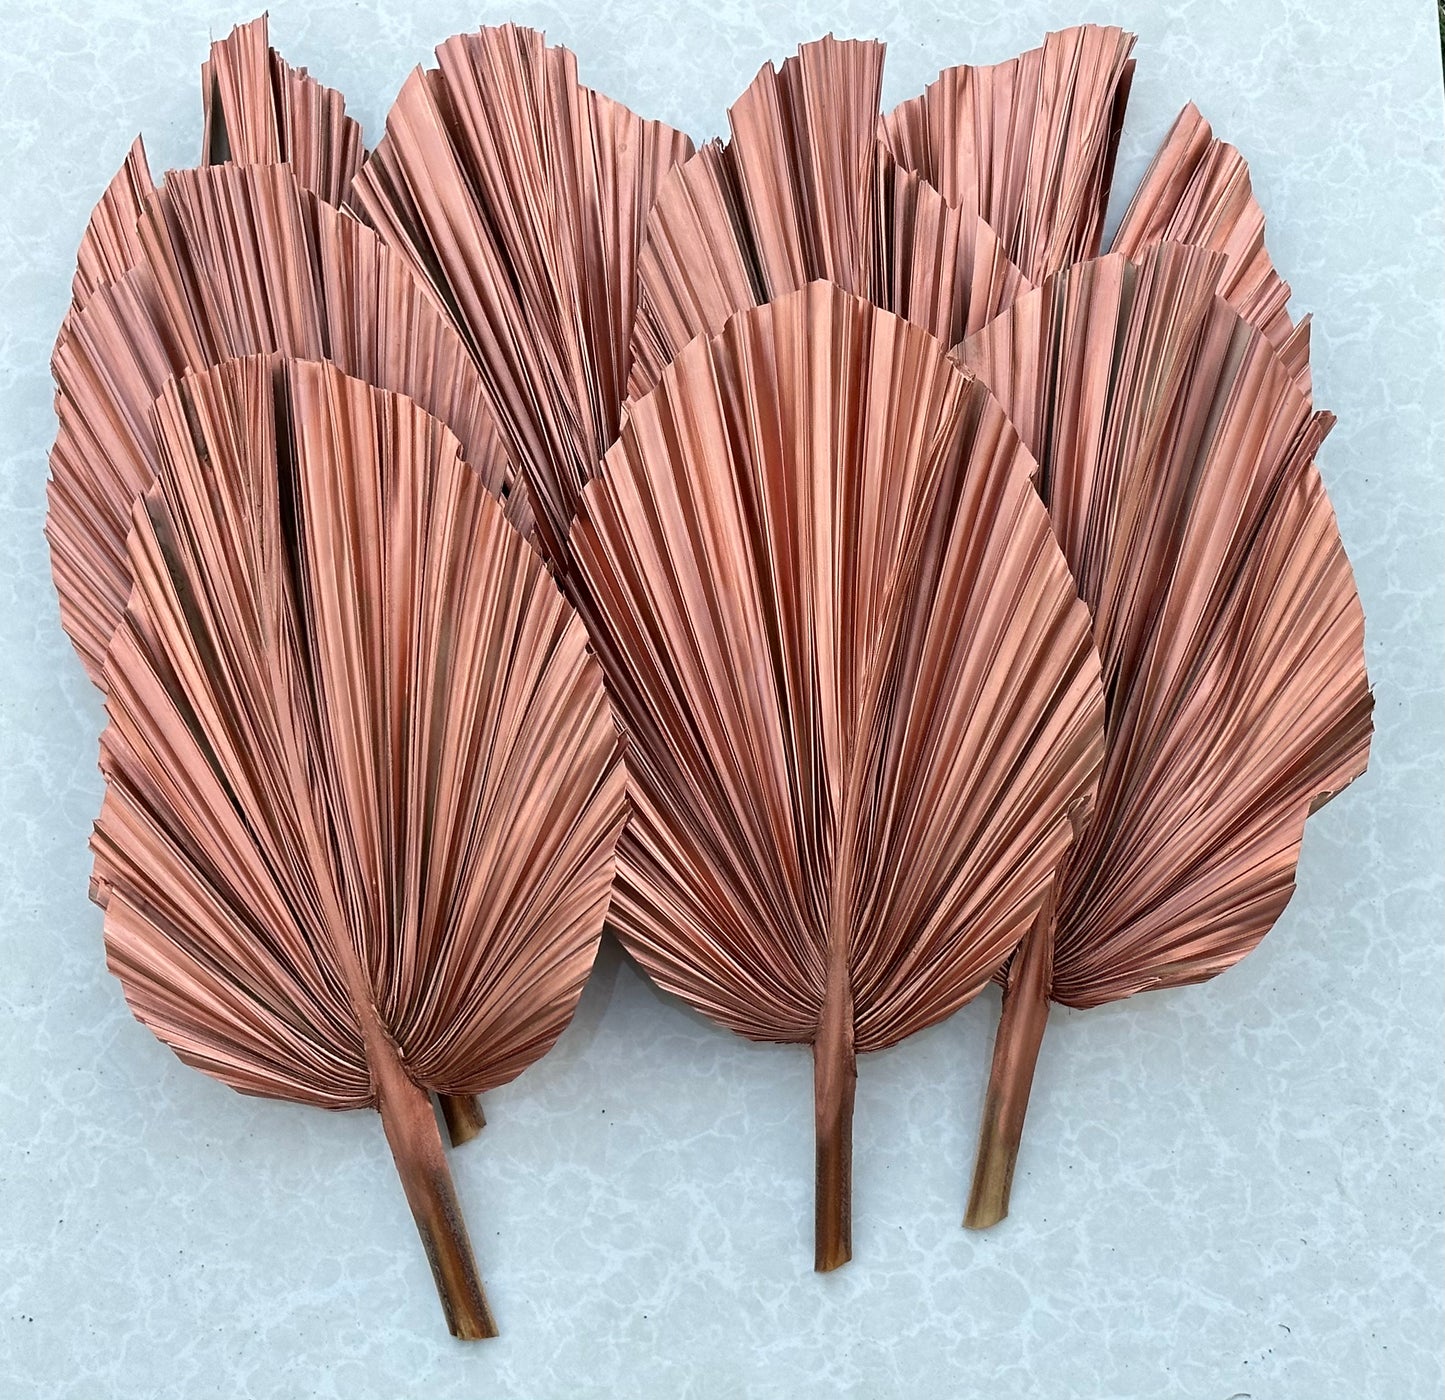 14" ROSE GOLD Dried Palm Leaf, Palm Frond, Home/Party/Wedding Decor